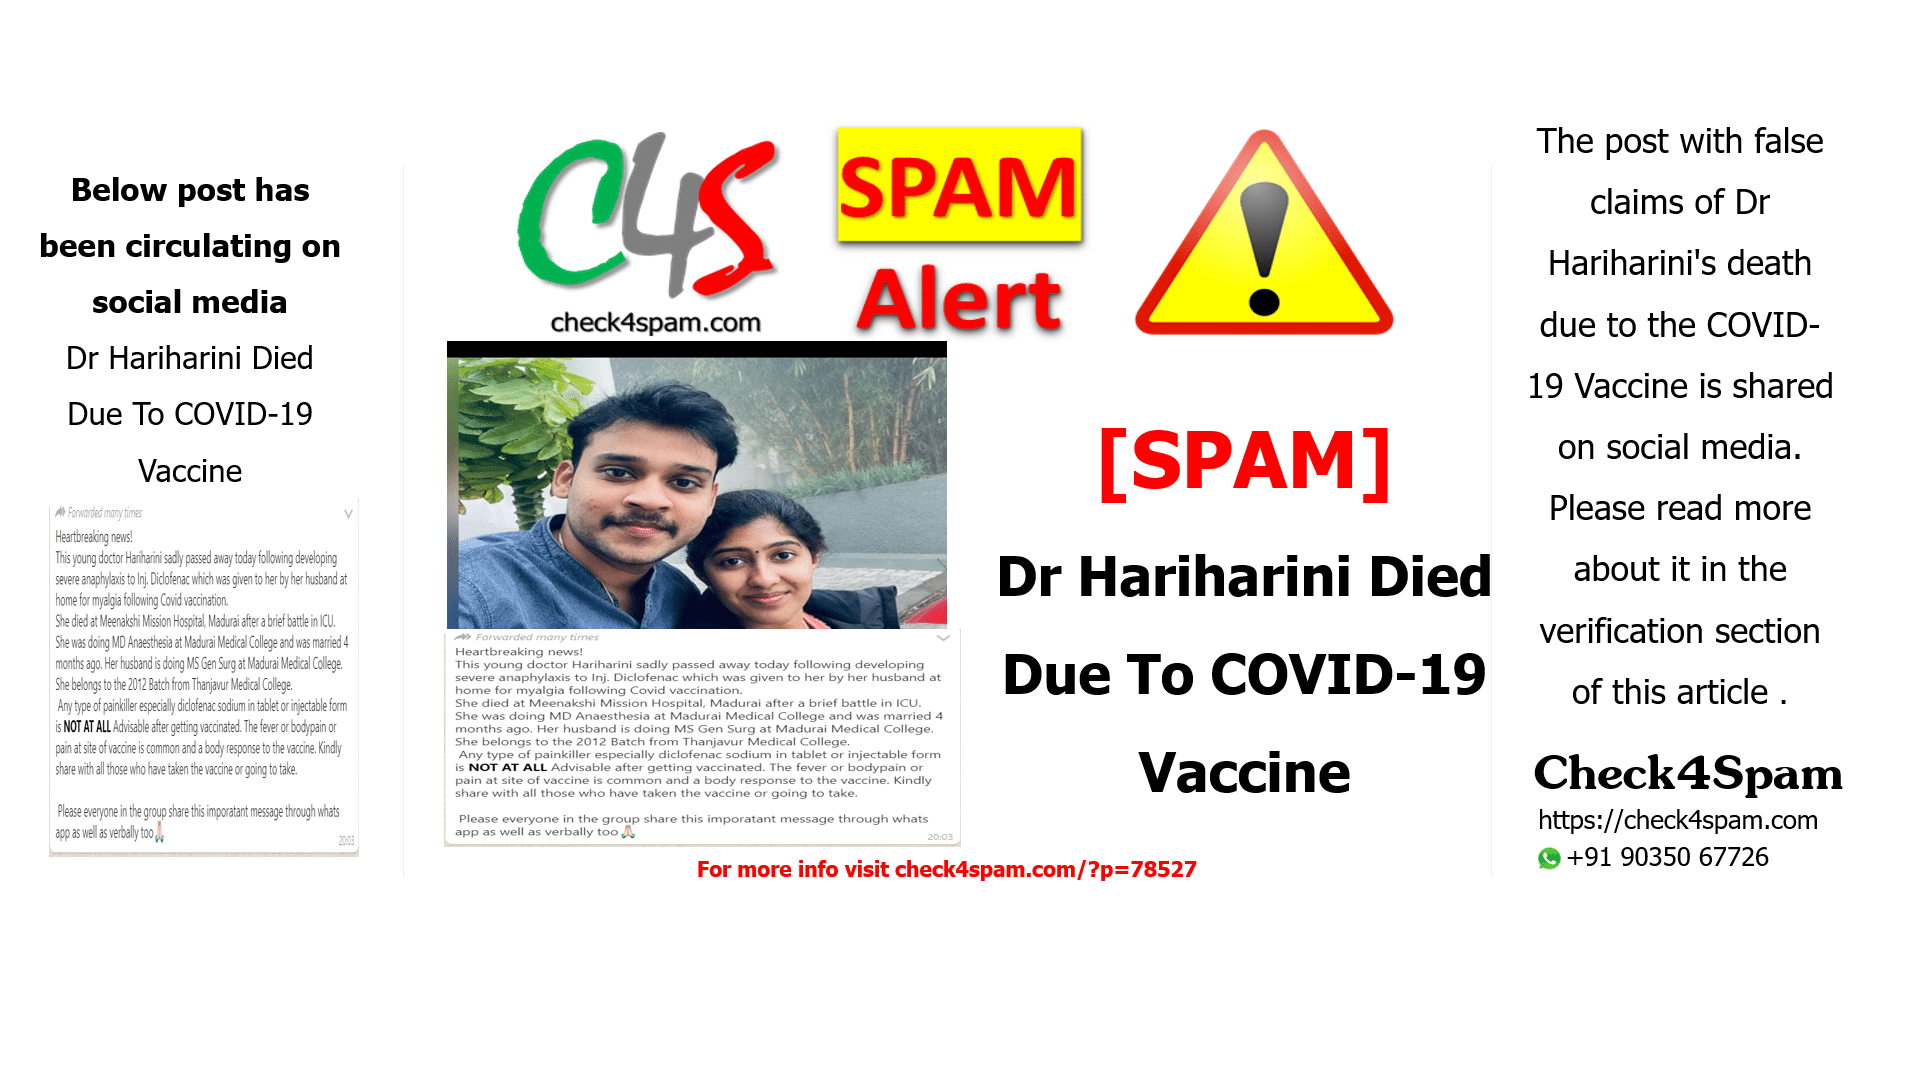 Dr Hariharini Died Due To COVID-19 Vaccine